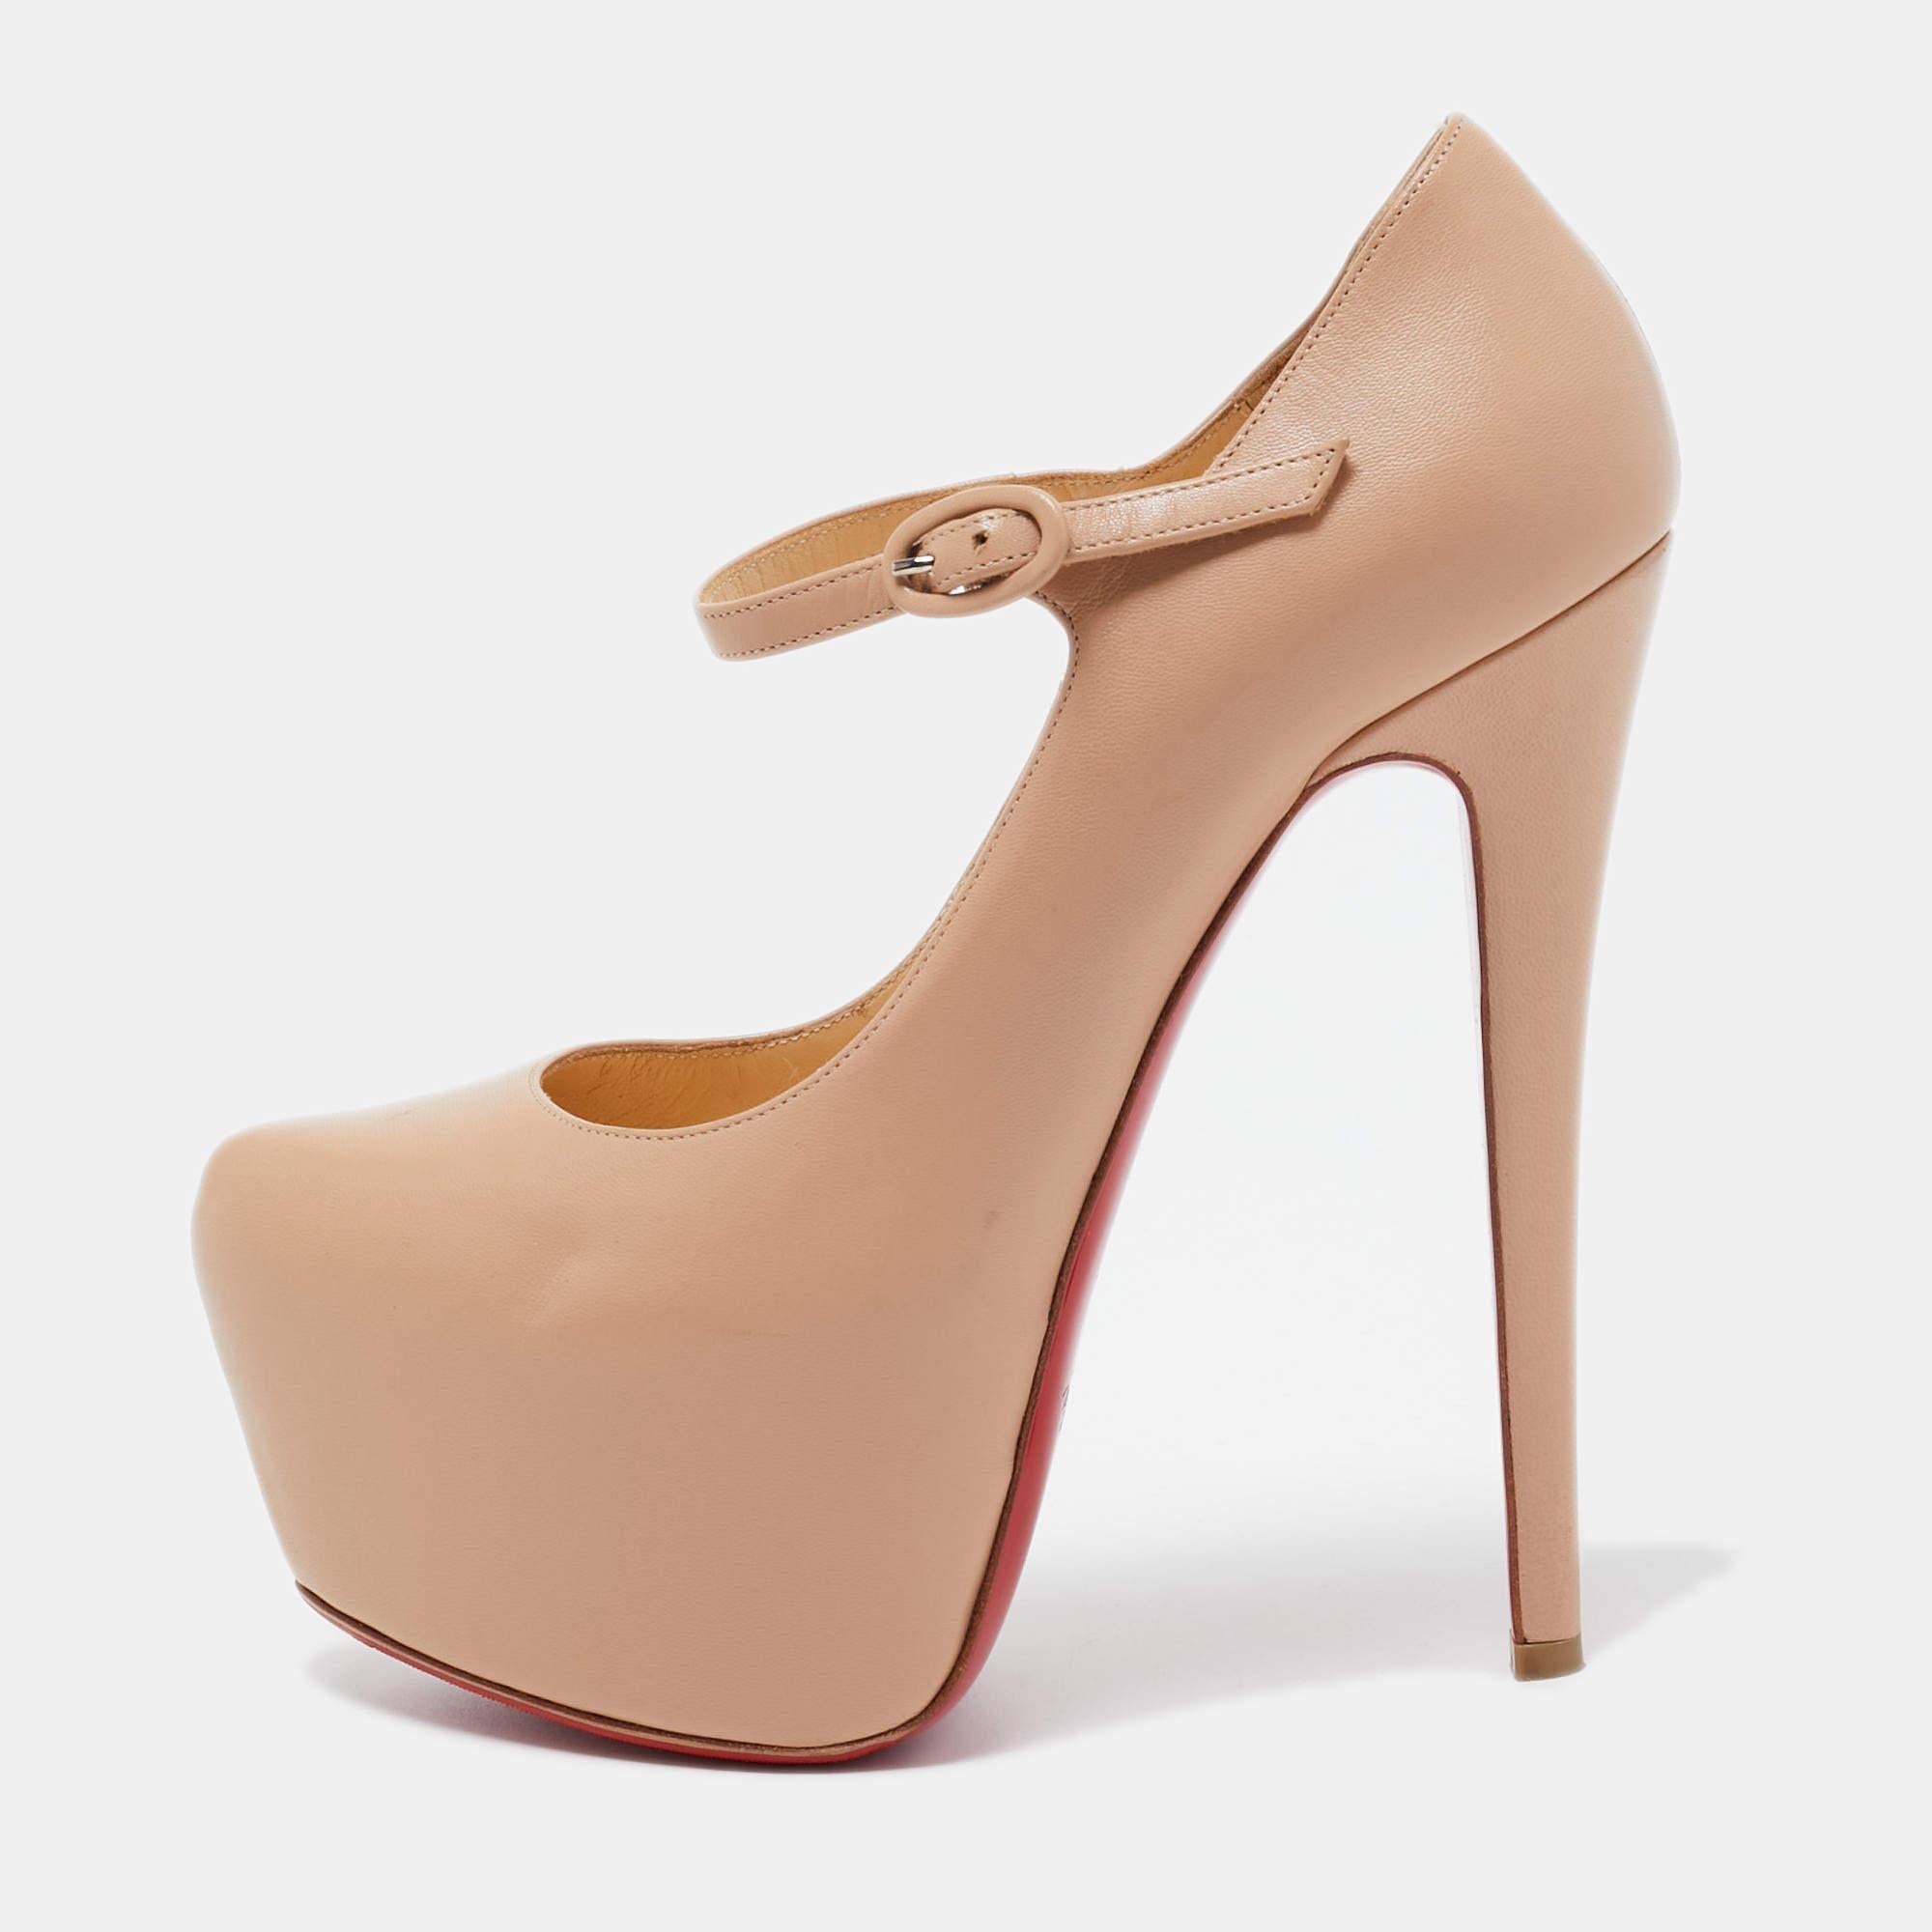 Christian Louboutin Beige Leather Lady Daf Pumps Size 36.5 For Sale 4